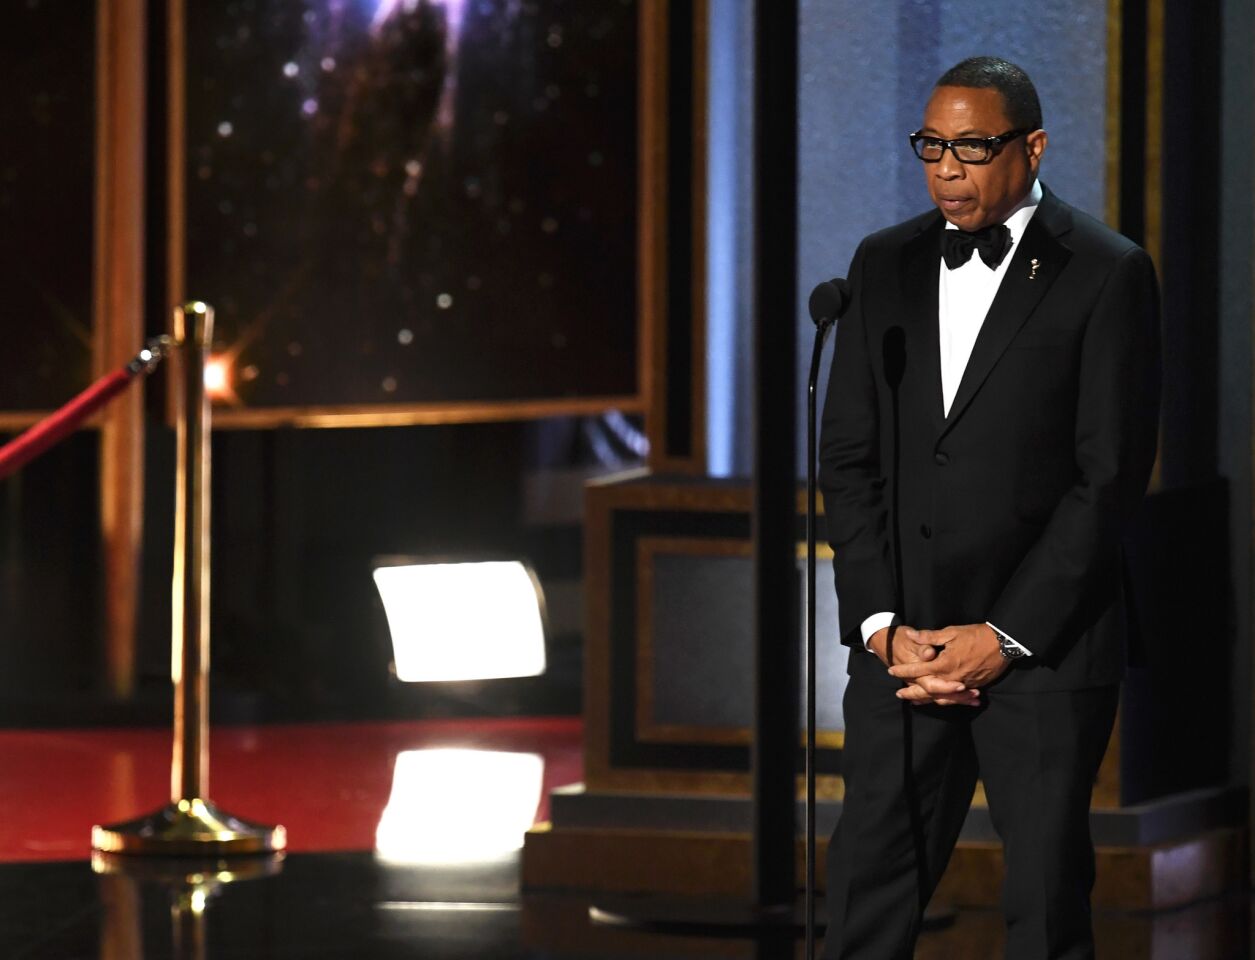 Television Academy President Hayma Washington onstage during the 69th Emmy Awards.